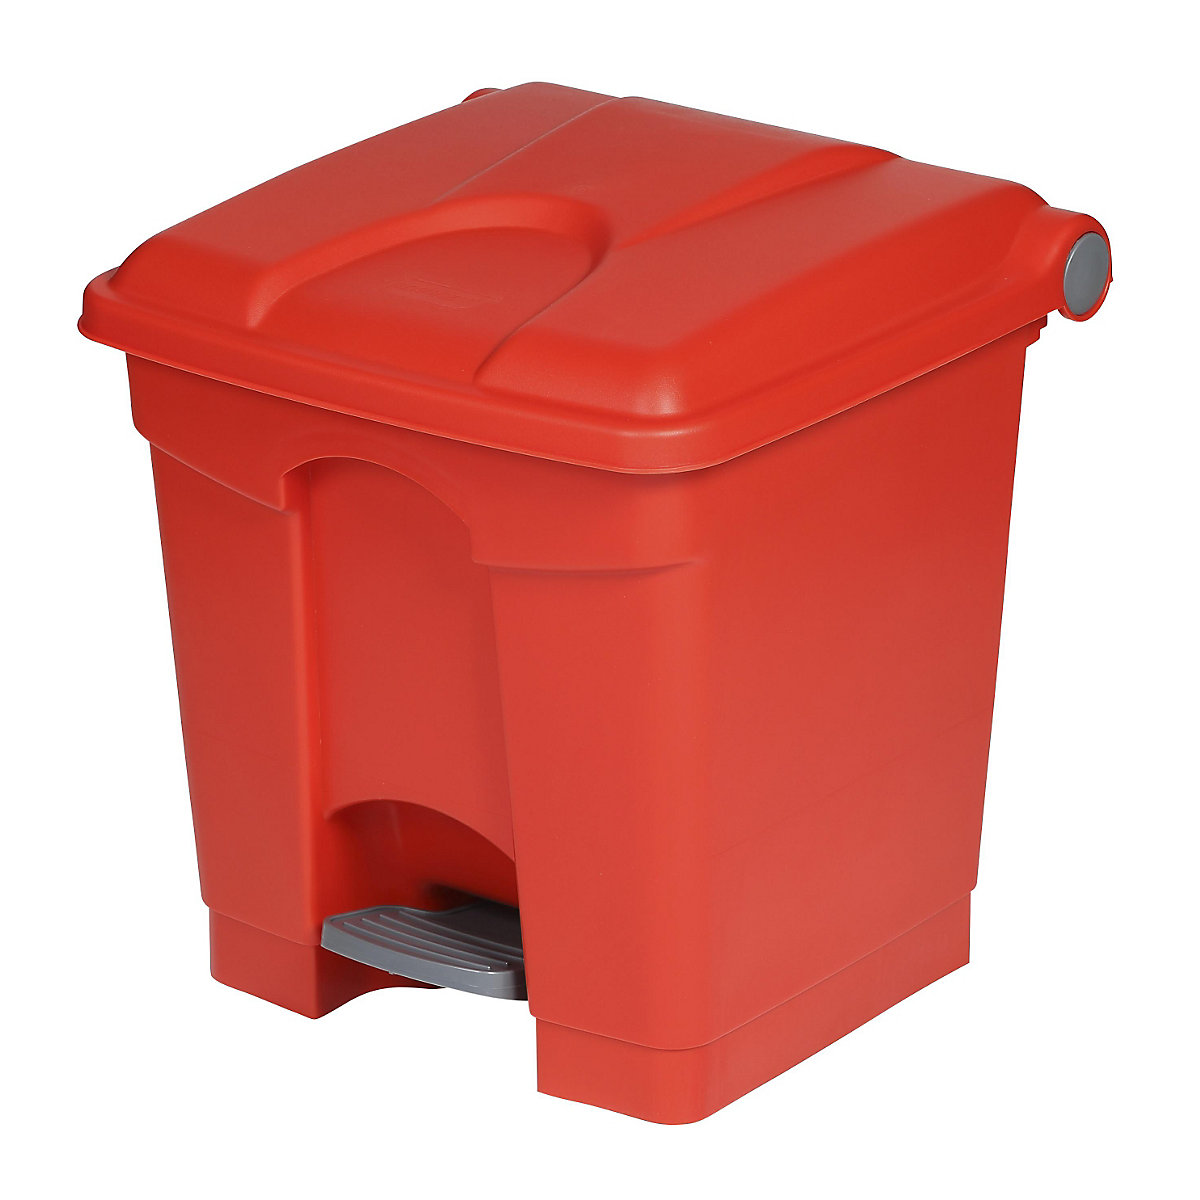 EUROKRAFTbasic – Pedal waste collector, capacity 30 l, WxHxD 410 x 435 x 400 mm, red